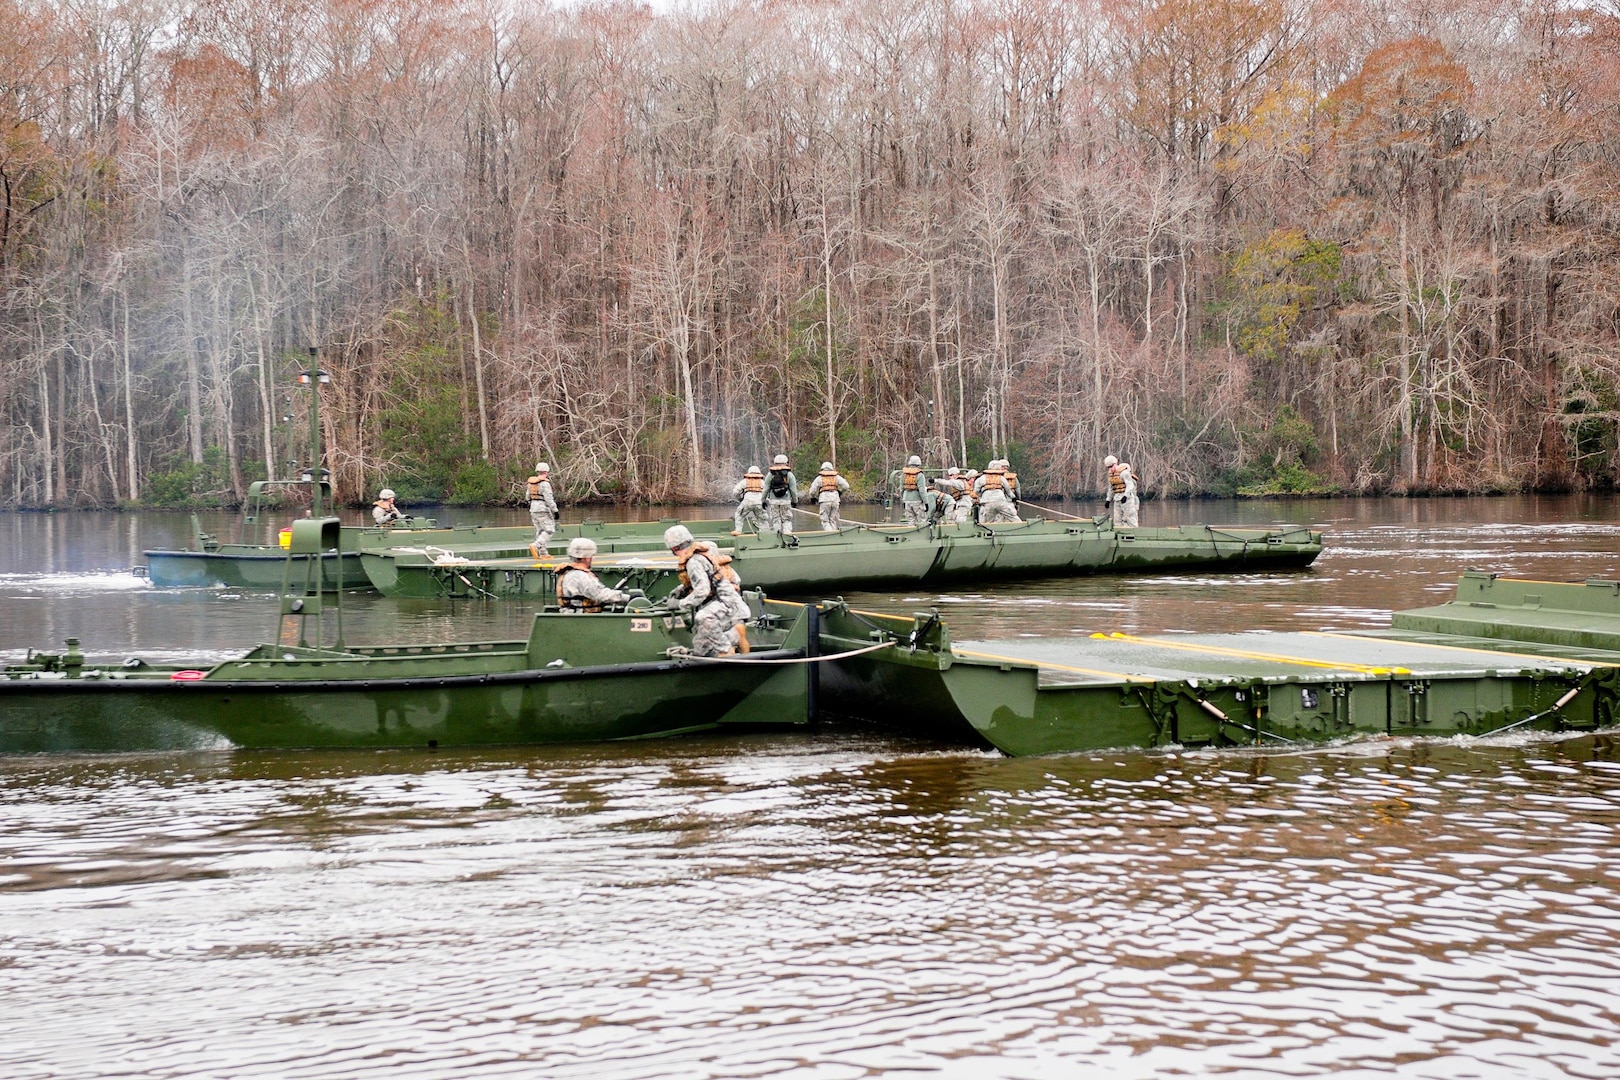 Members of the 125th Multi-Role Bridge Company (MRBC), South Carolina Army National Guard, construct a temporary floating bridge to support "Palmetto Thunder" and Operation Coastal Response, a joint training exercise between local authorities and the National Guard on Feb. 1, 2014, at Murrells Inlet, S.C.